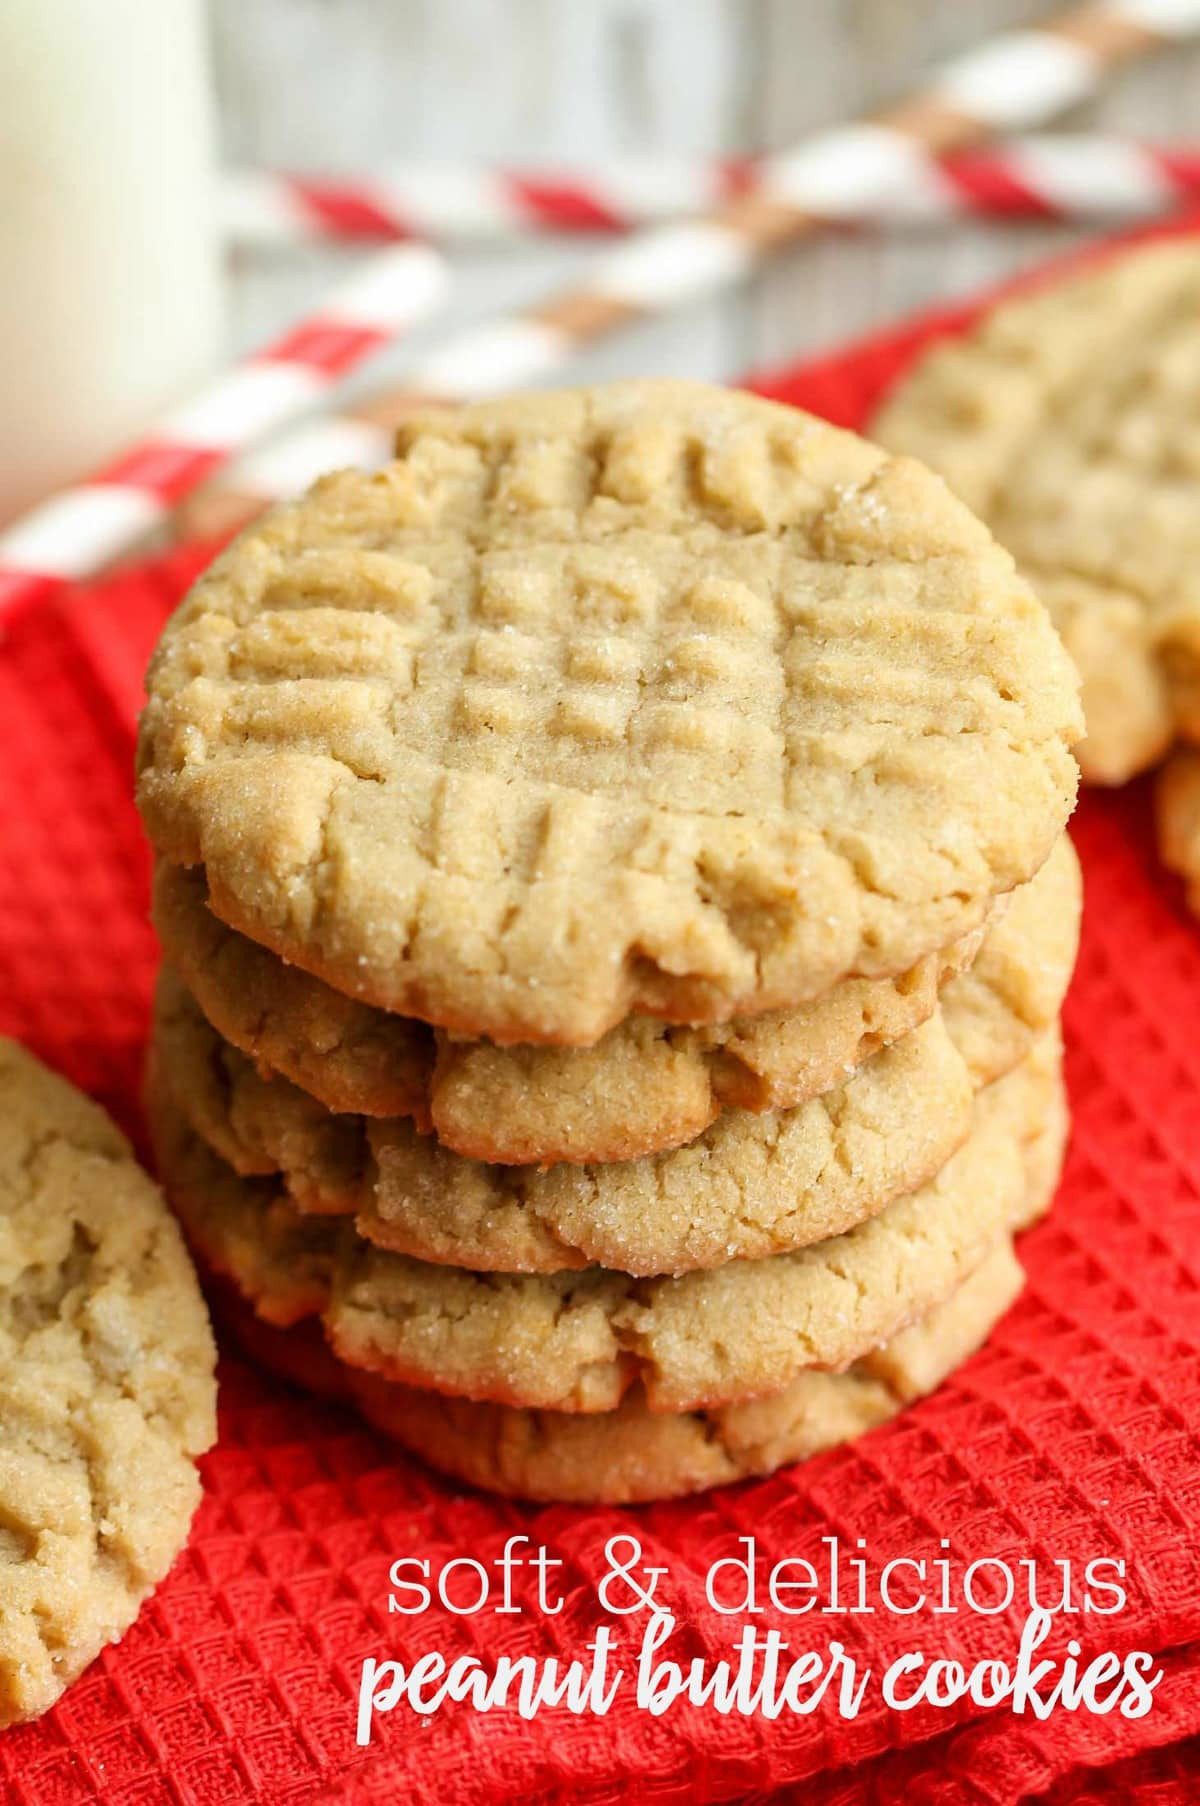 Peanut Butter Cookies Allrecipes
 EASY & SOFT Peanut Butter Cookies